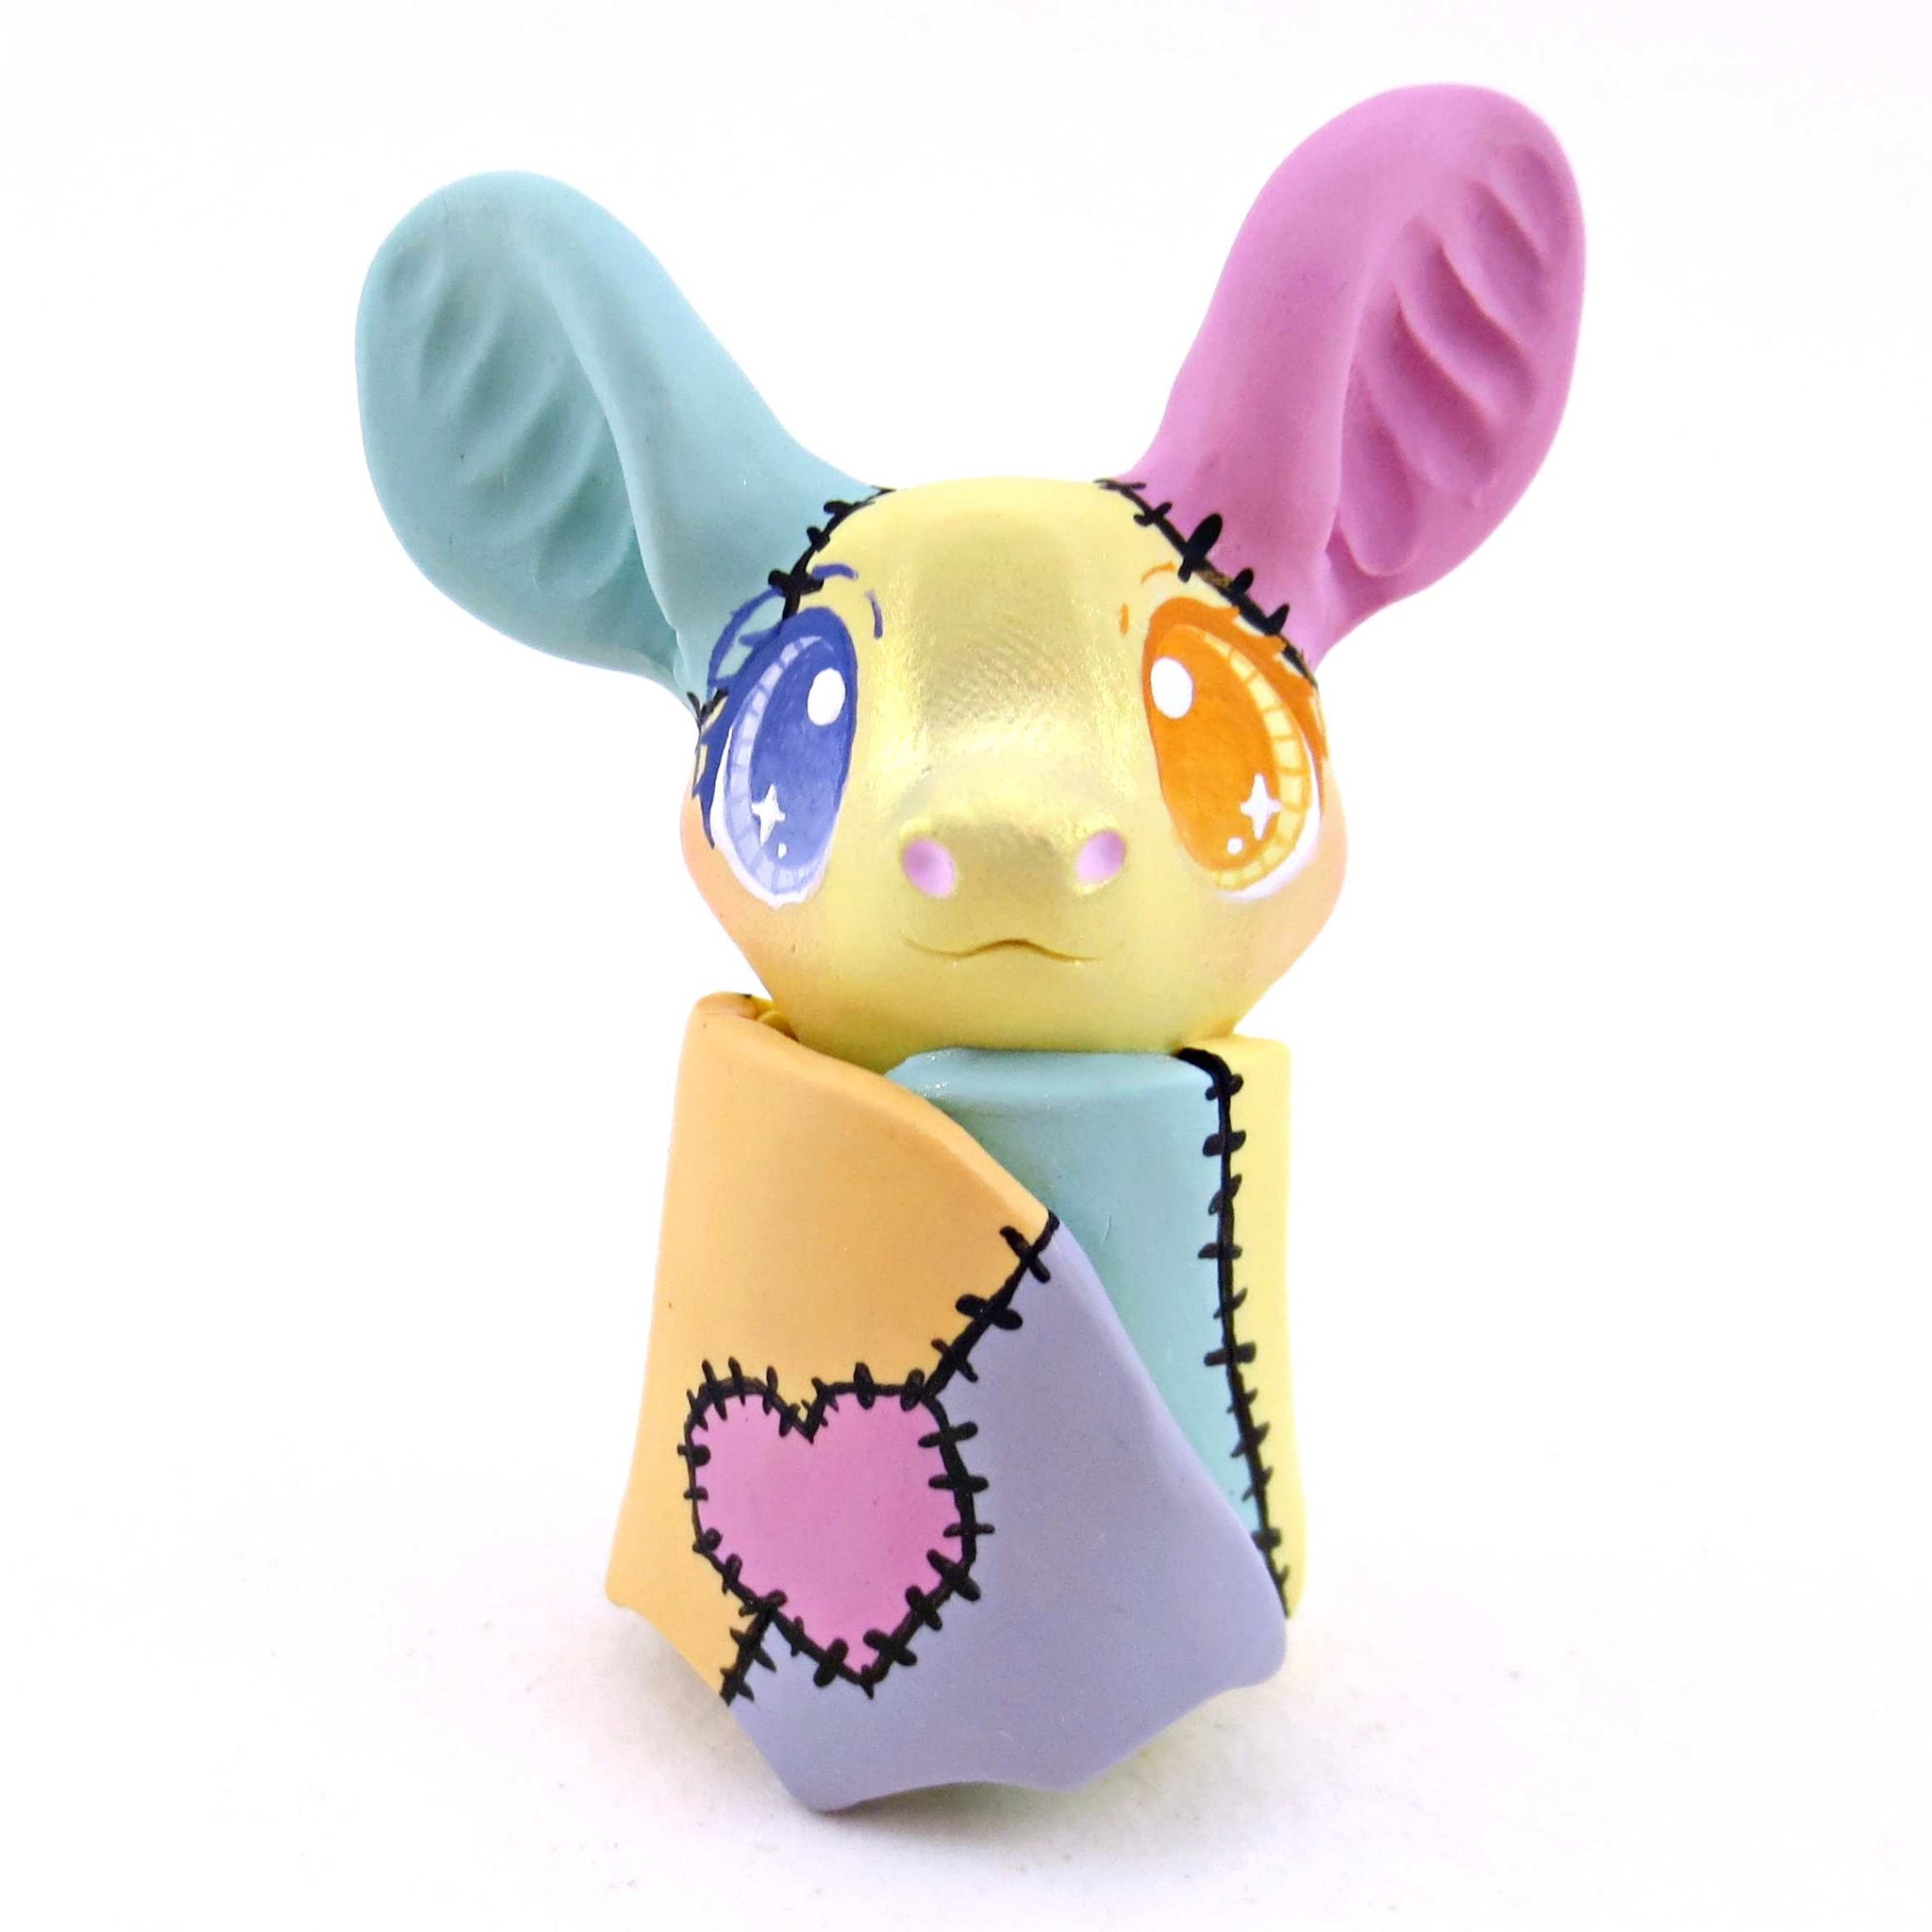 Patchwork Bat Figurine - Version 1 - Polymer Clay Spooky Season Animal Collection